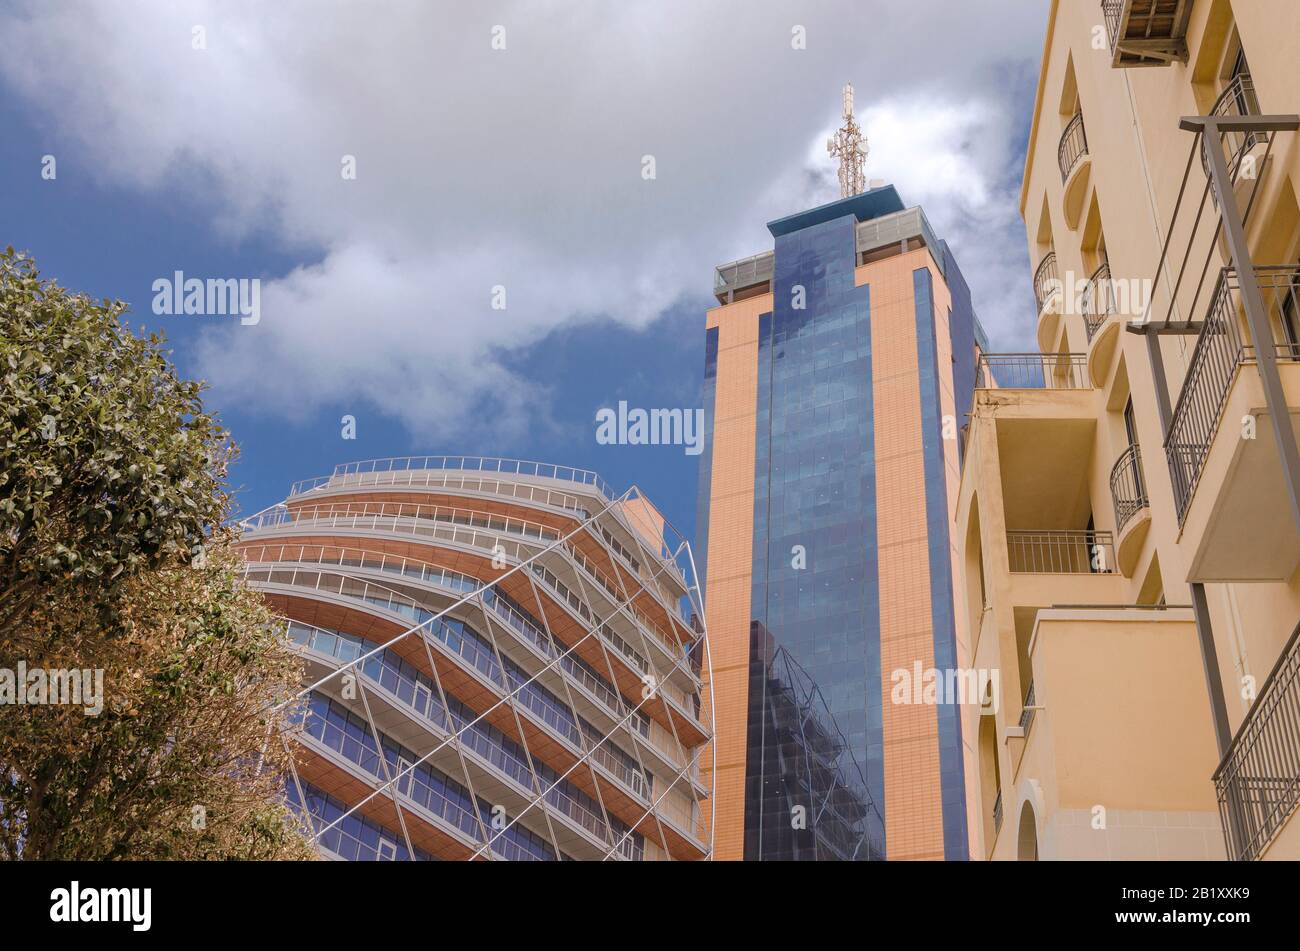 Paola, Malta; April 15, 2019: Street of Paola district - modern architecture with a ship inspired building facade Stock Photo